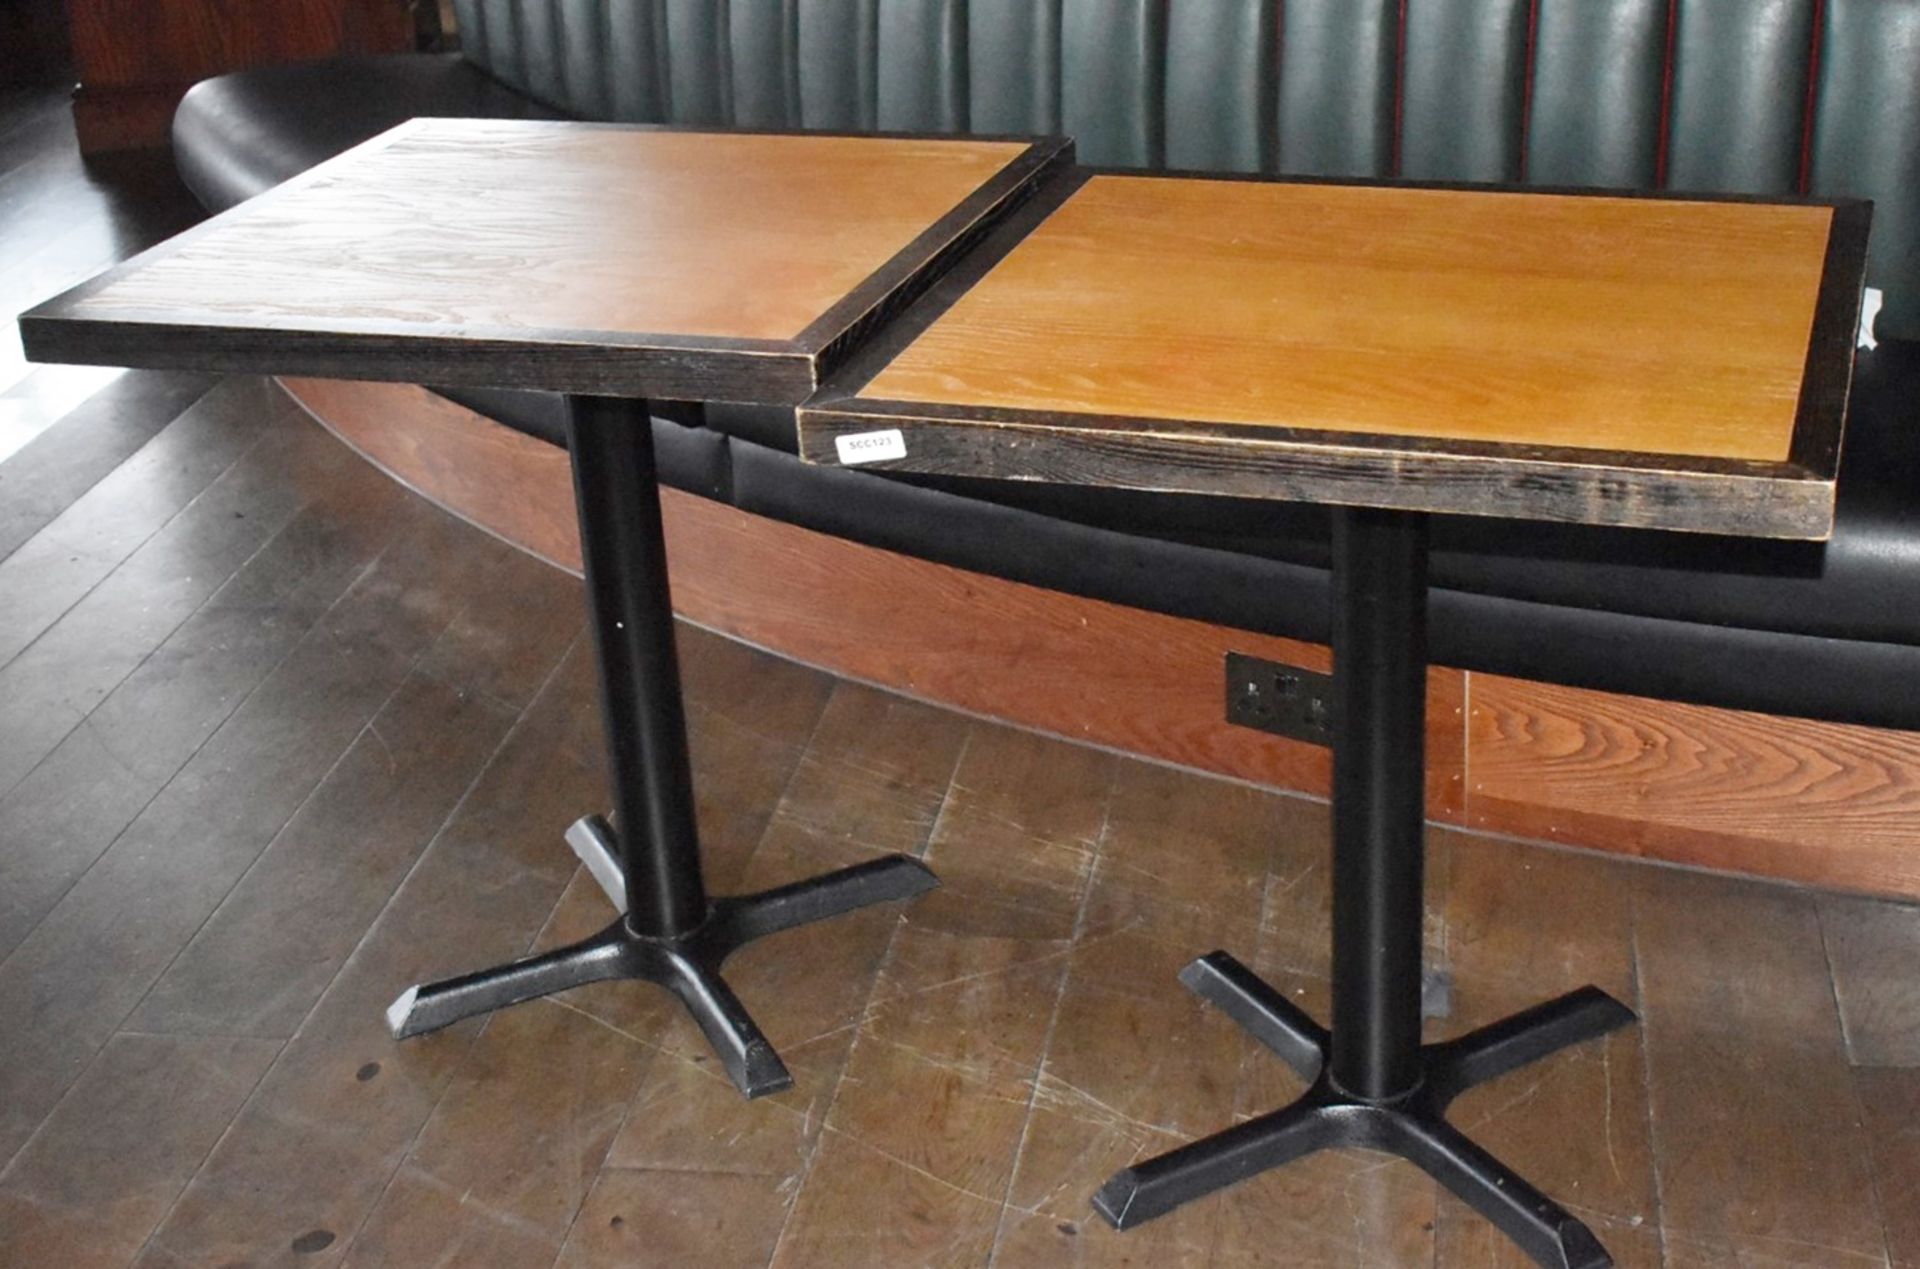 2 x Restaurant Dining Tables - Seats 2 Persons Per Table - Two Tone Wooden Top and Cast Iron Bases - Image 4 of 5